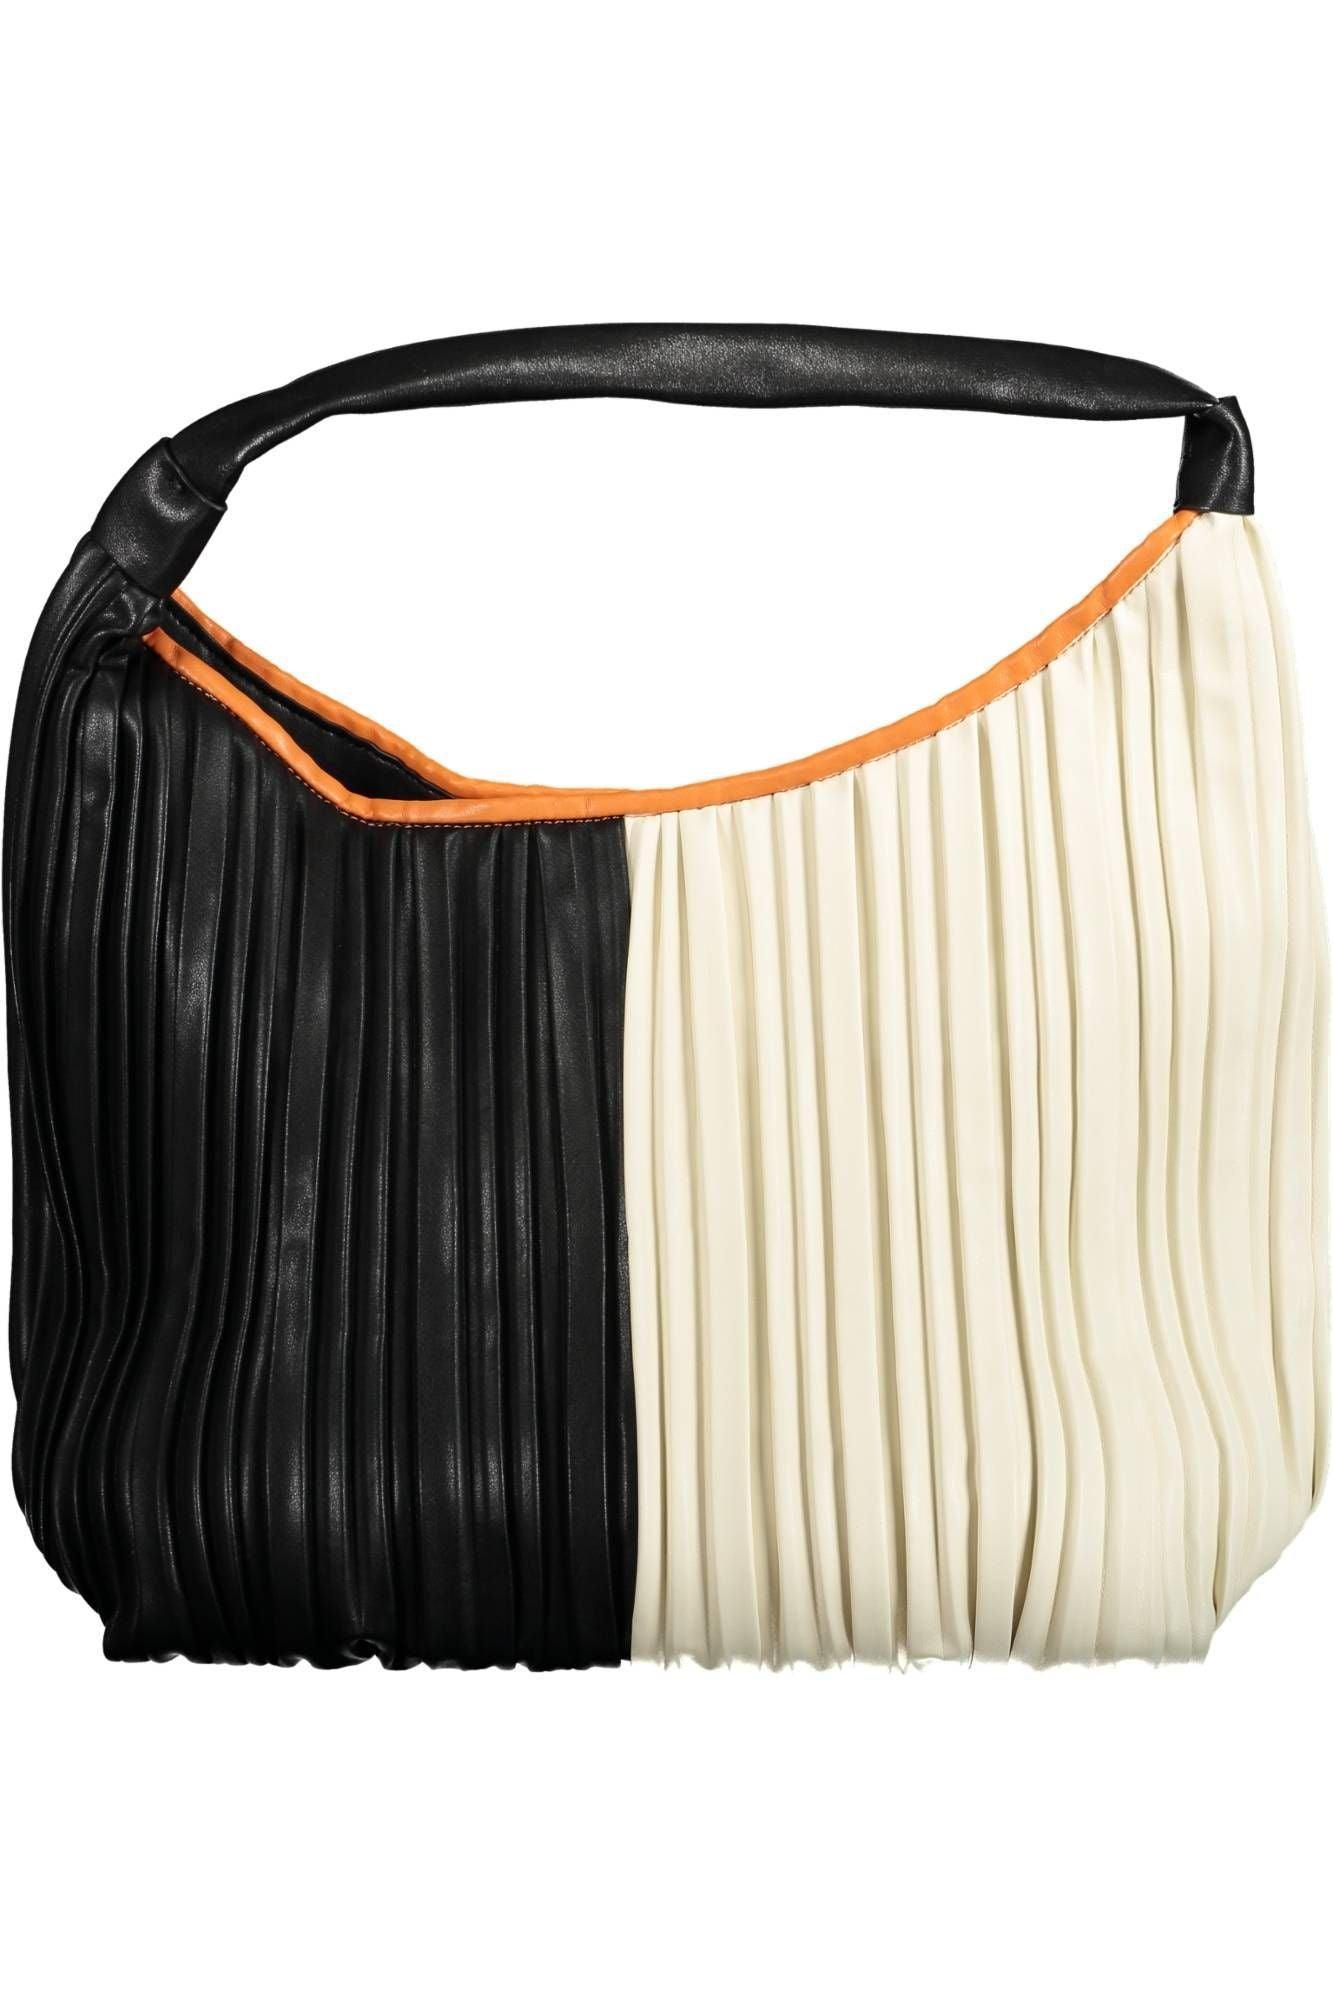 Desigual Chic Black Shoulder Bag with Contrasting Accents - PER.FASHION